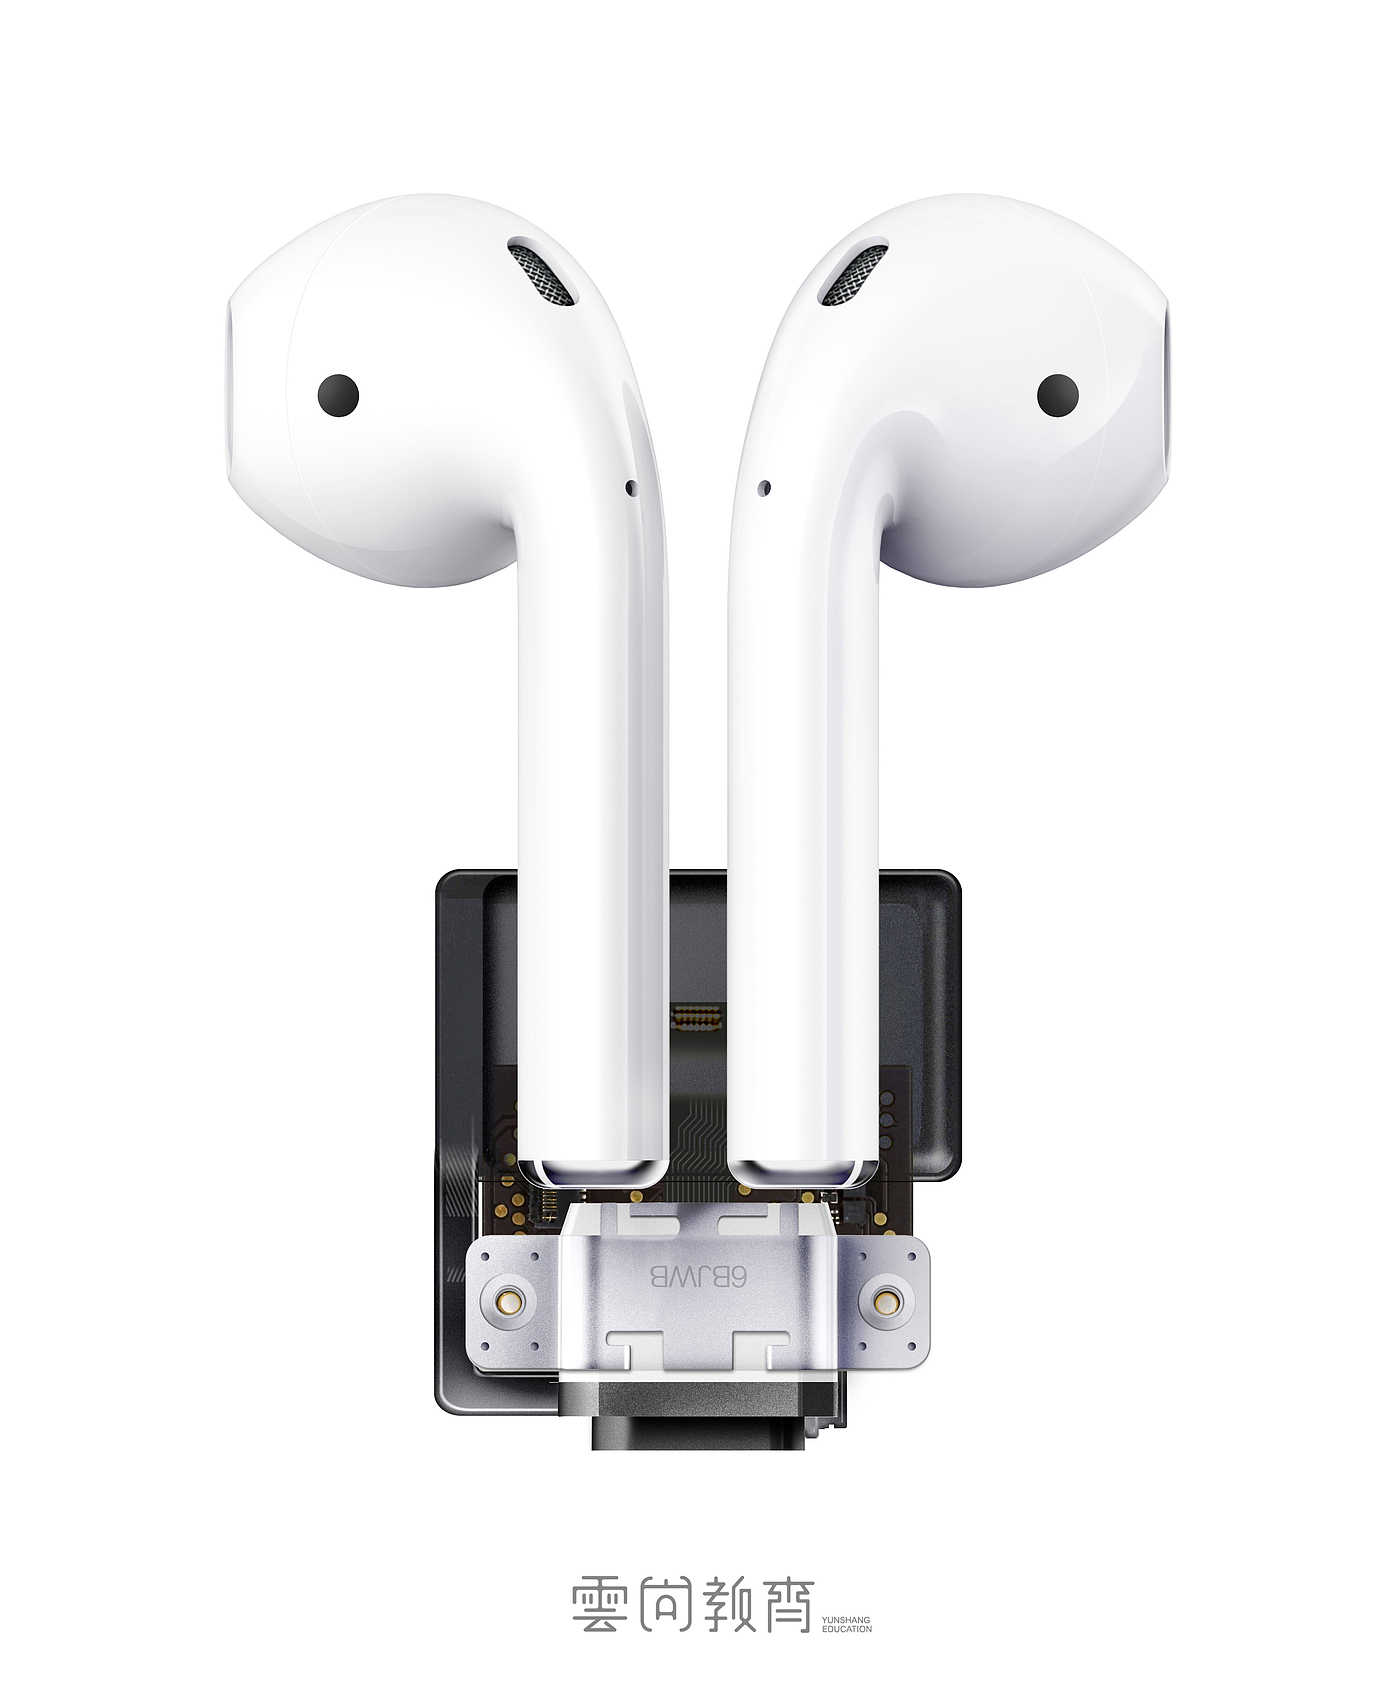 airpods，